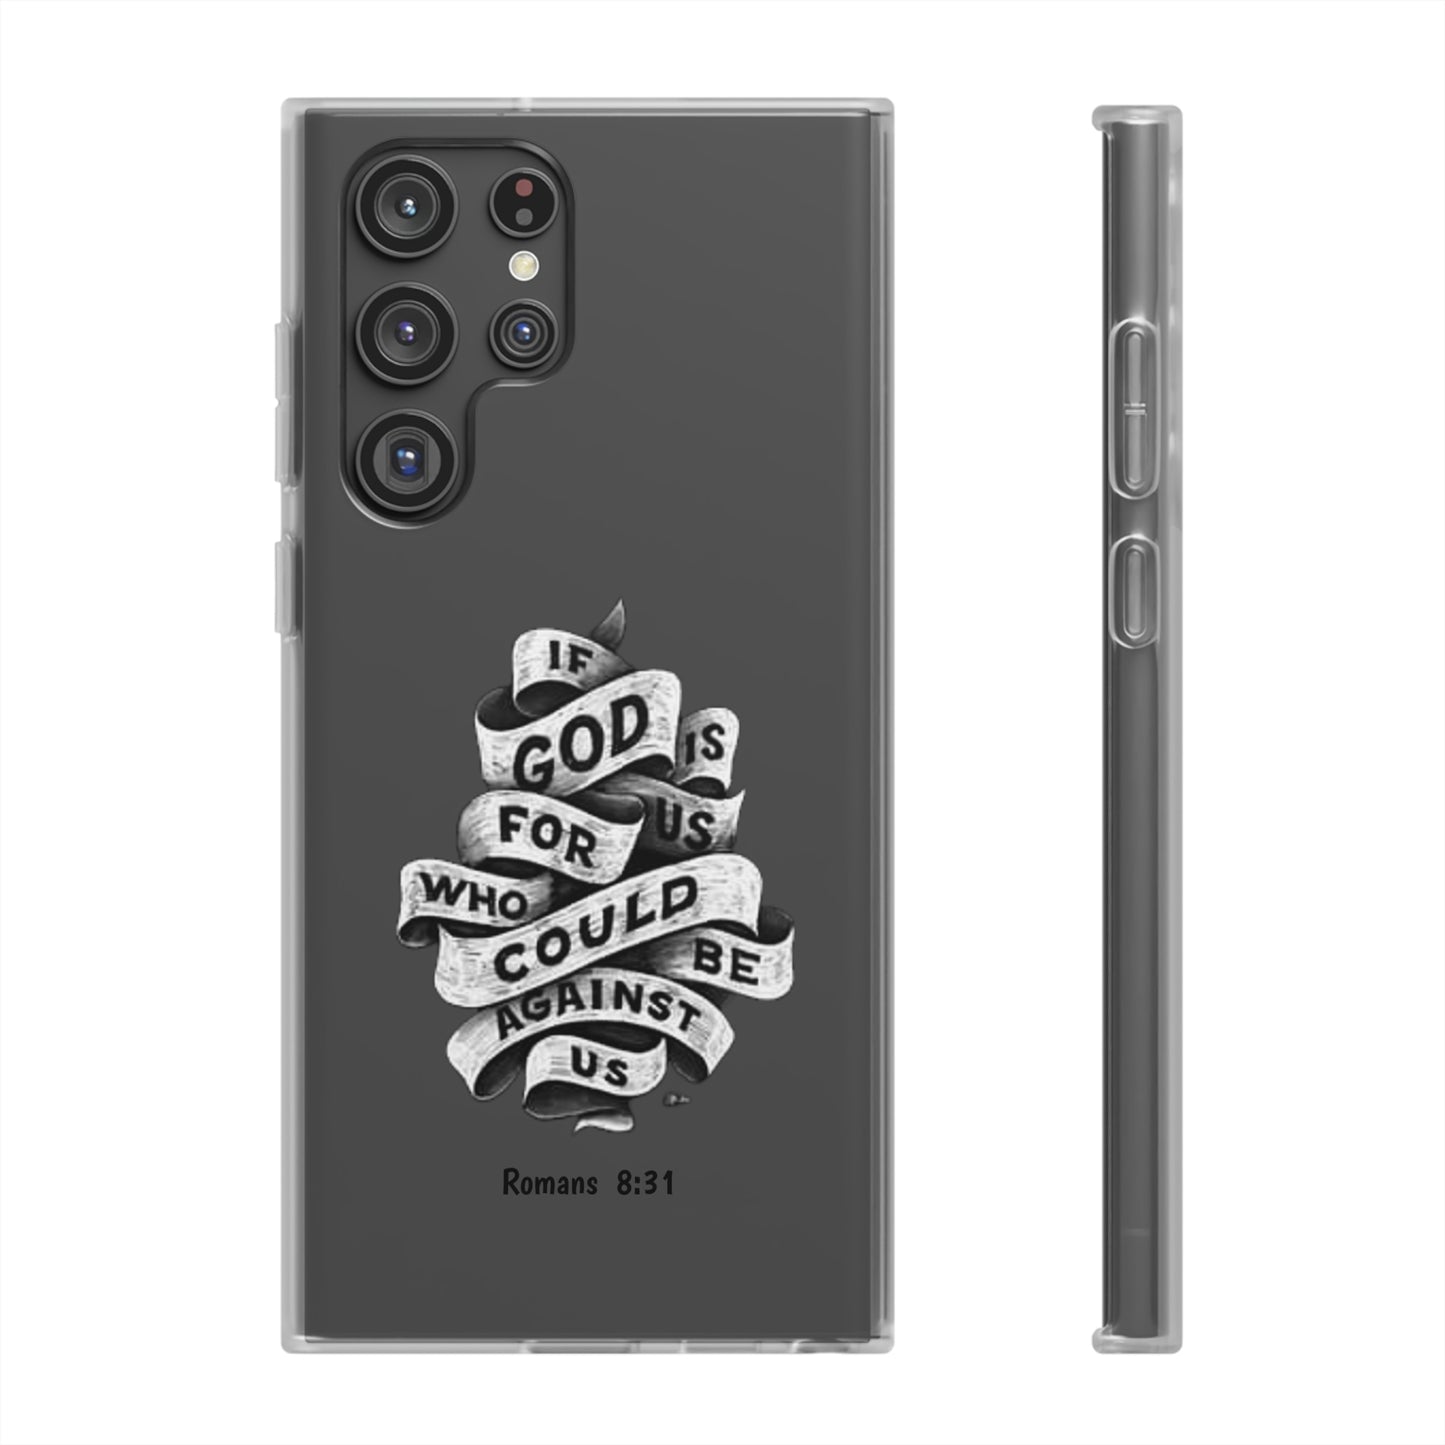 If God Is For Us Samsung Flexi Case